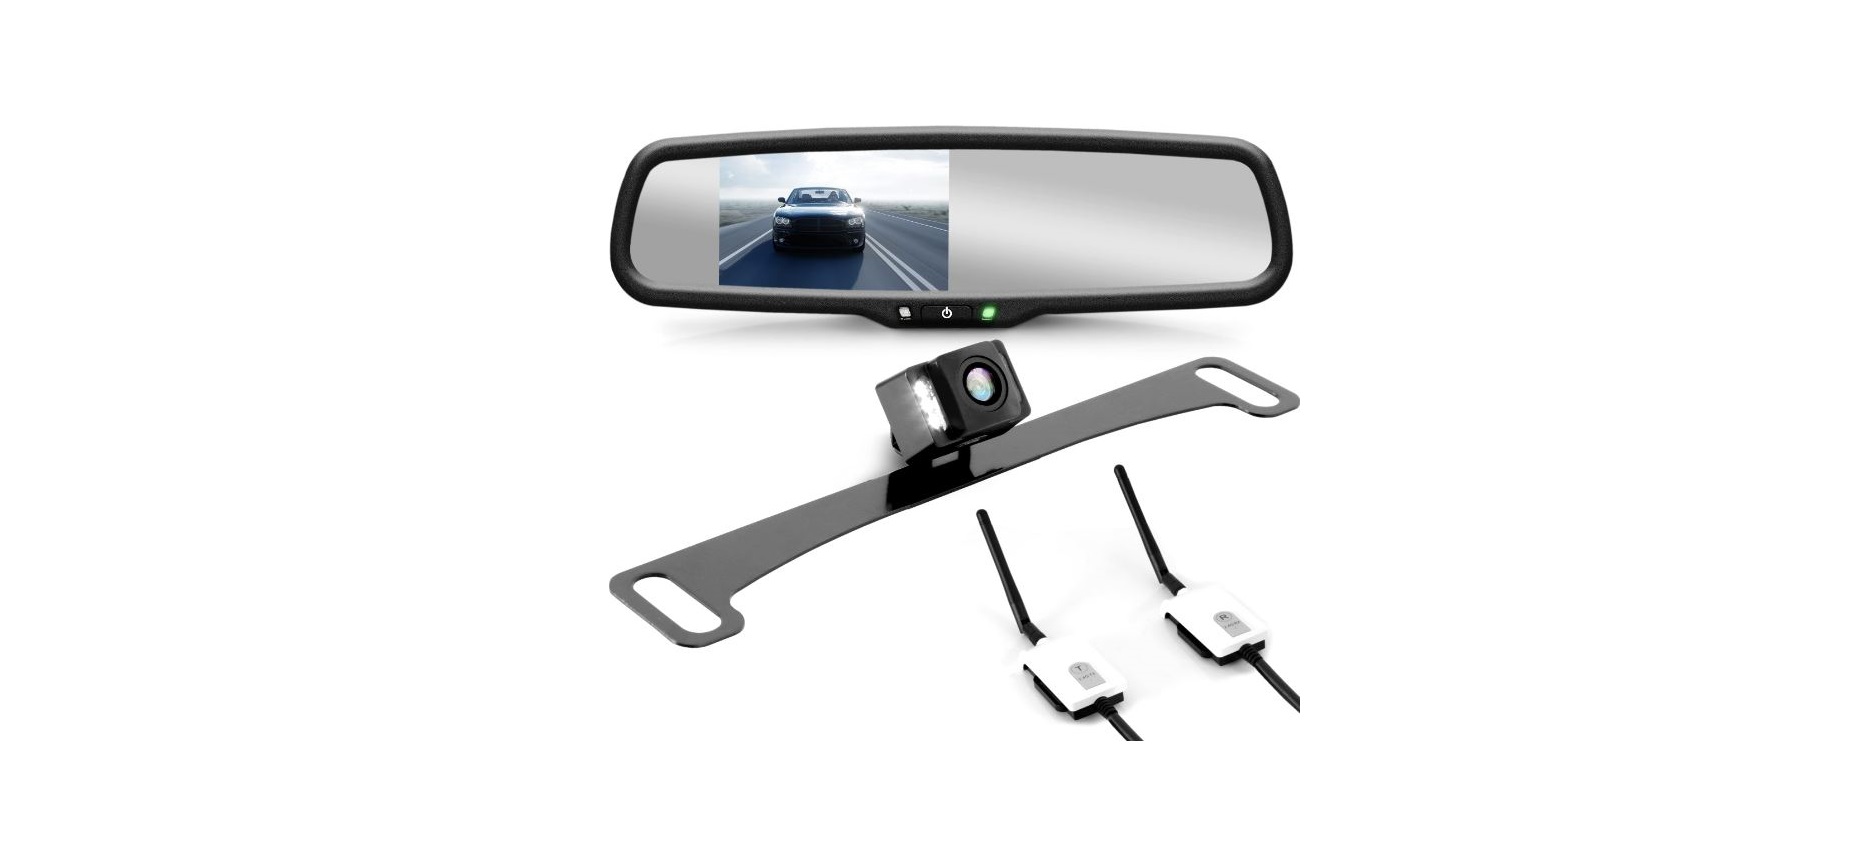 Pyle PLCM4590WIR Wireless Backup Rear View Camera FEATURE